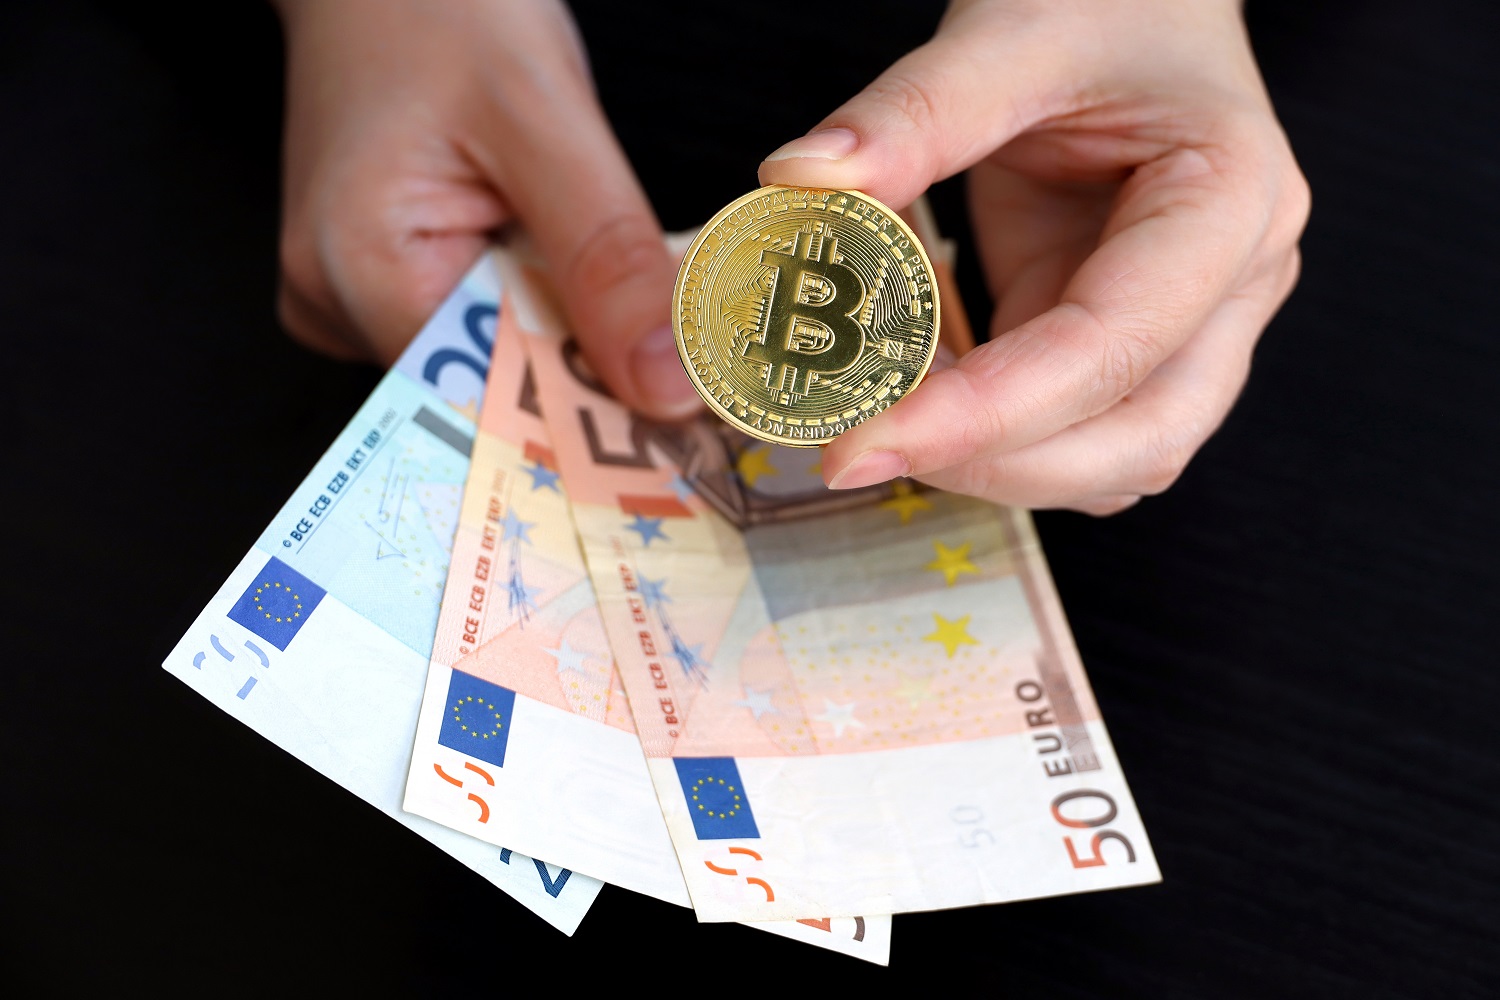 A person’s hands holding a token intended to represent Bitcoin in one hand and euro banknotes in the other.